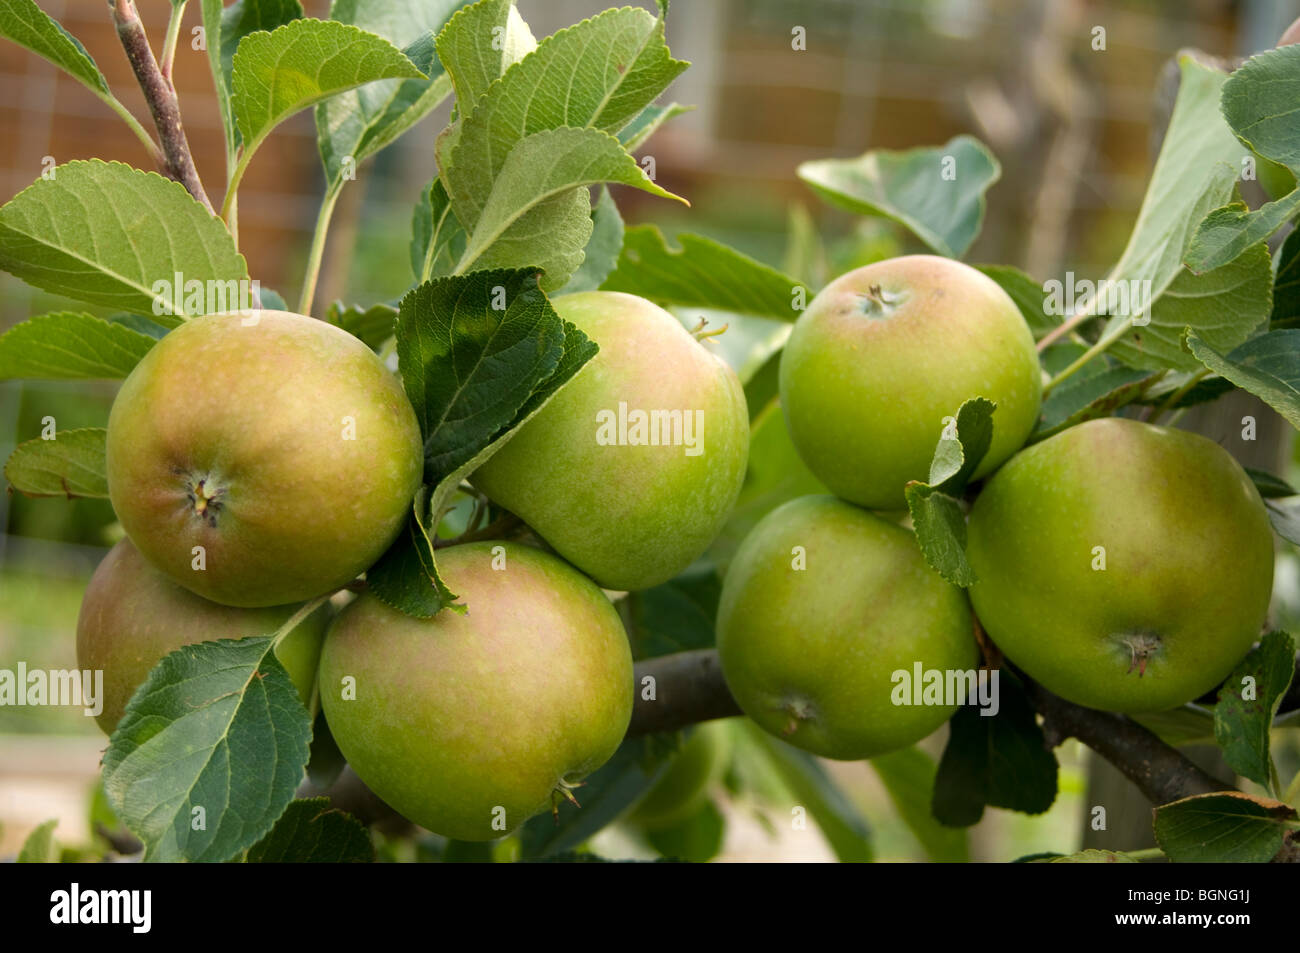 Close up of apples (Malus domestica) on the branch of a tree Stock Photo